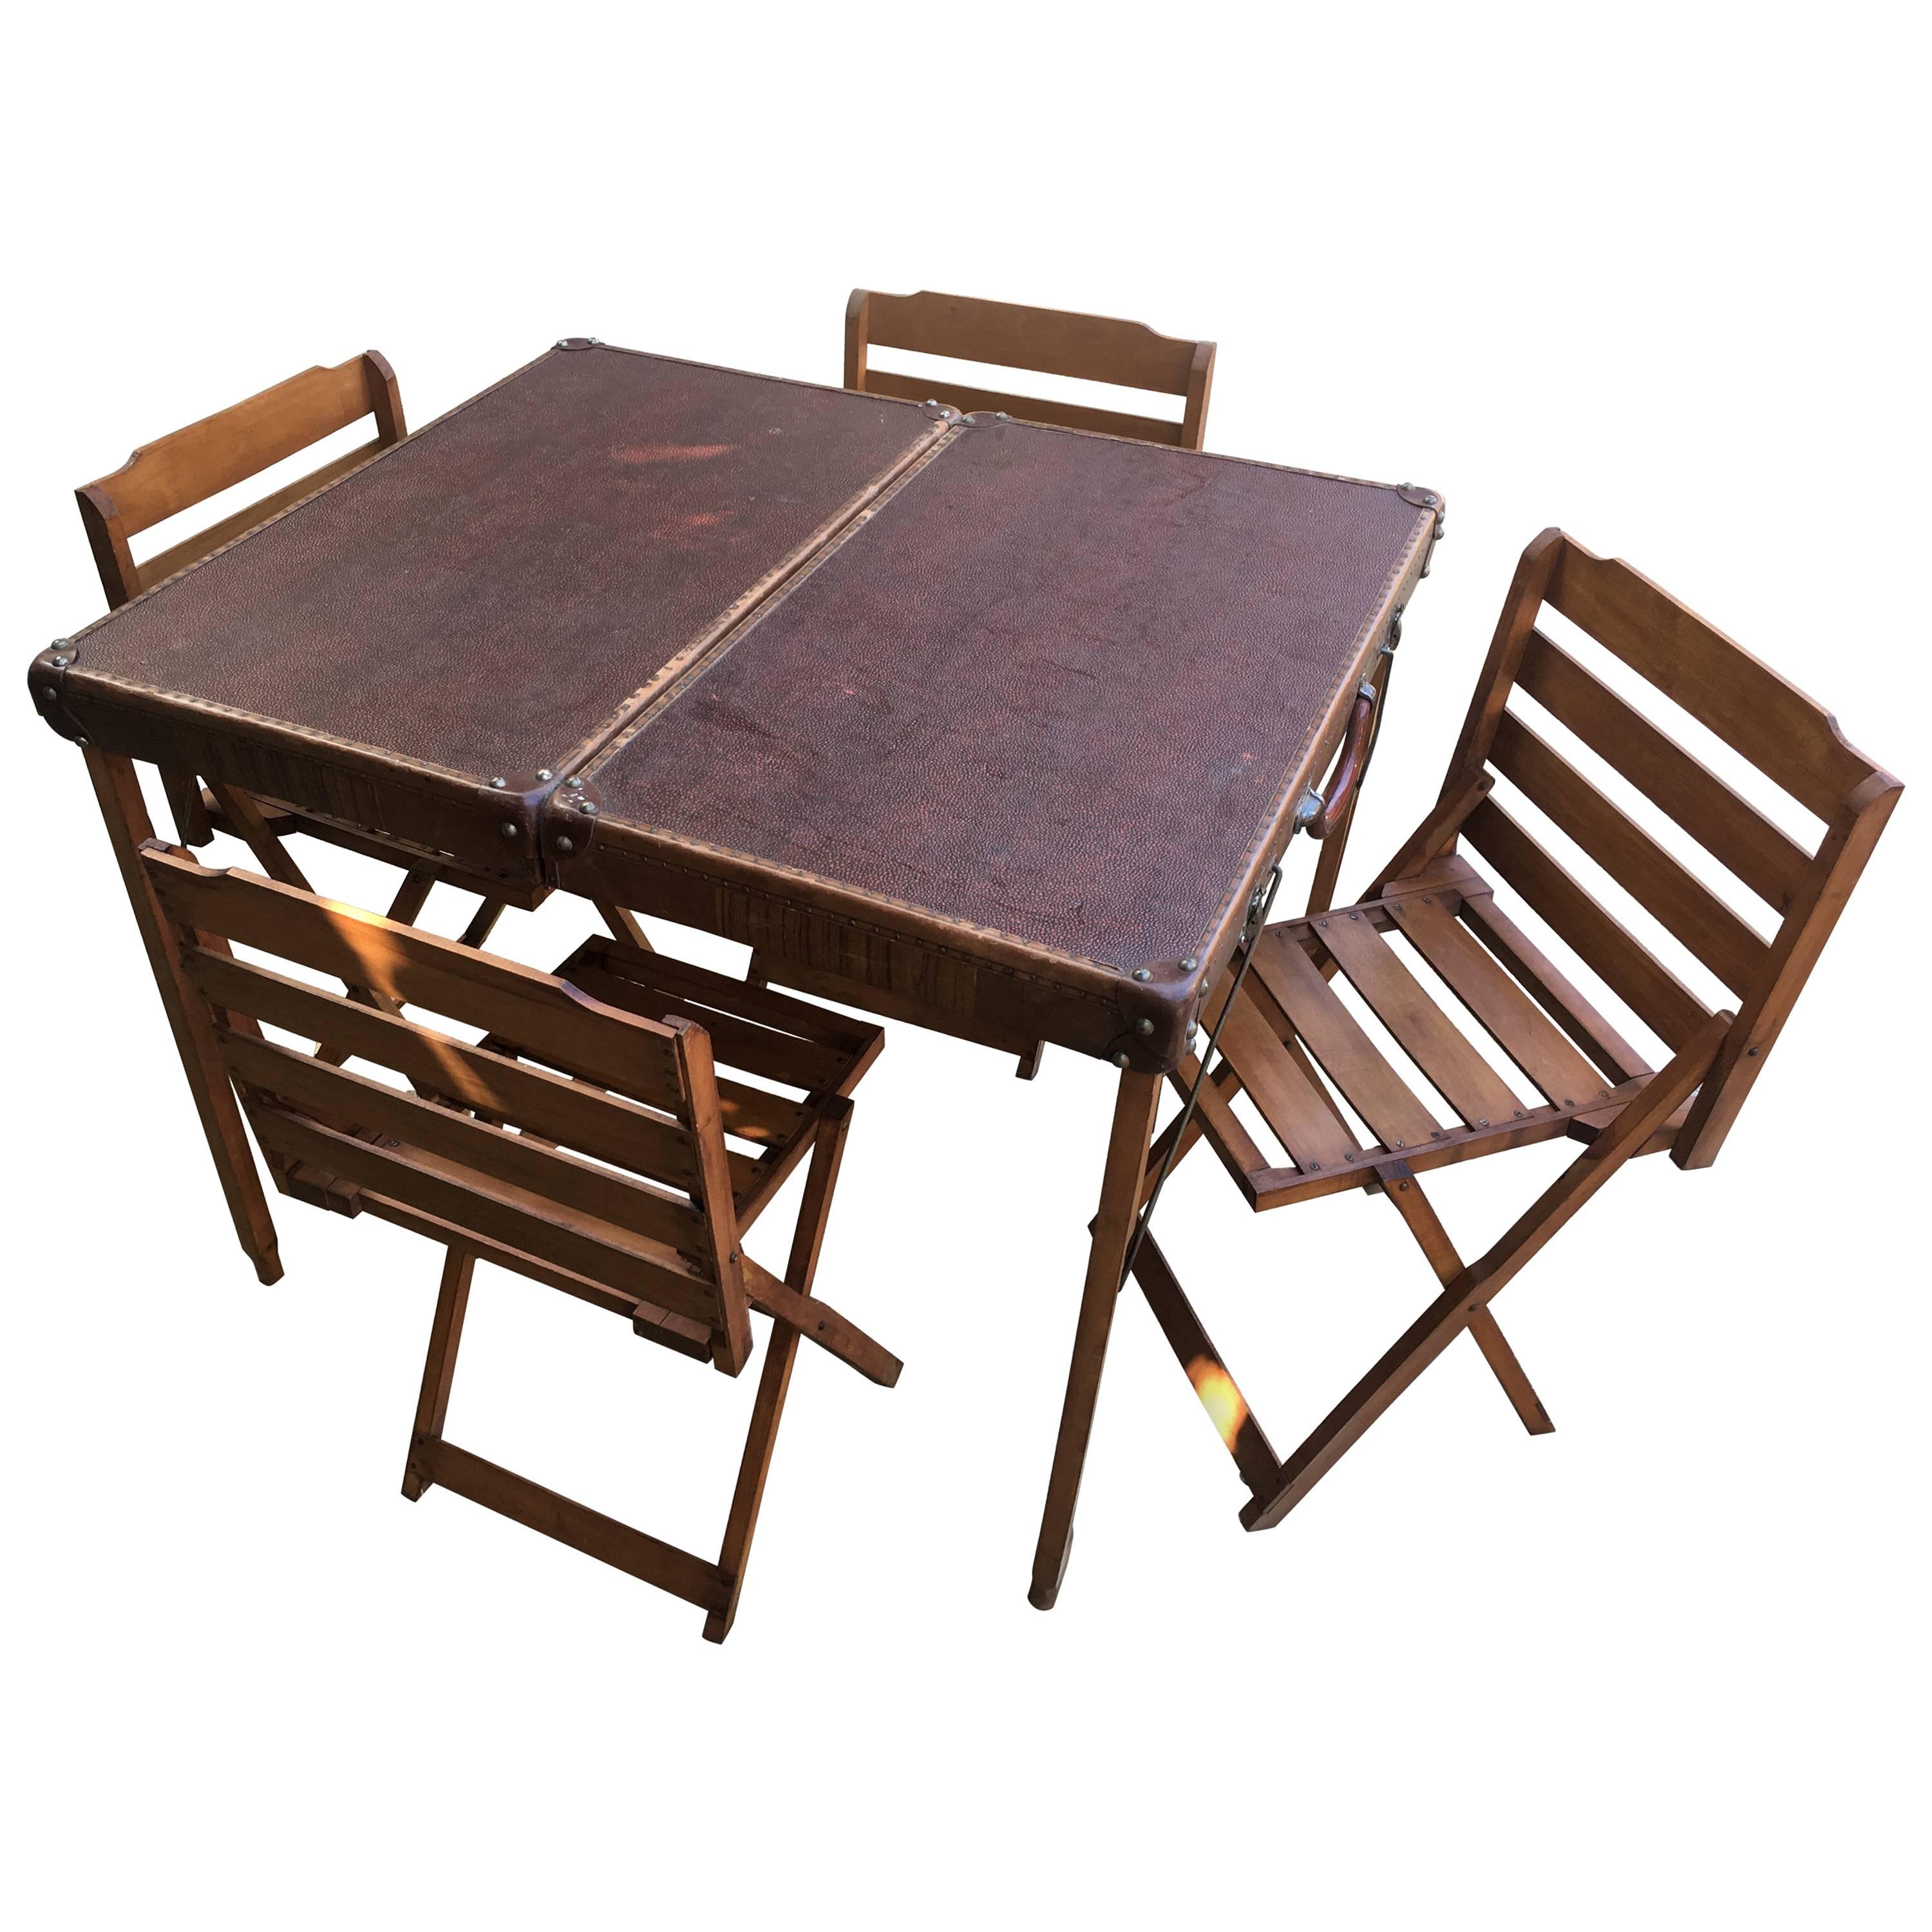 Italian Picnic Folding Table with Chairs from 1950s For Sale